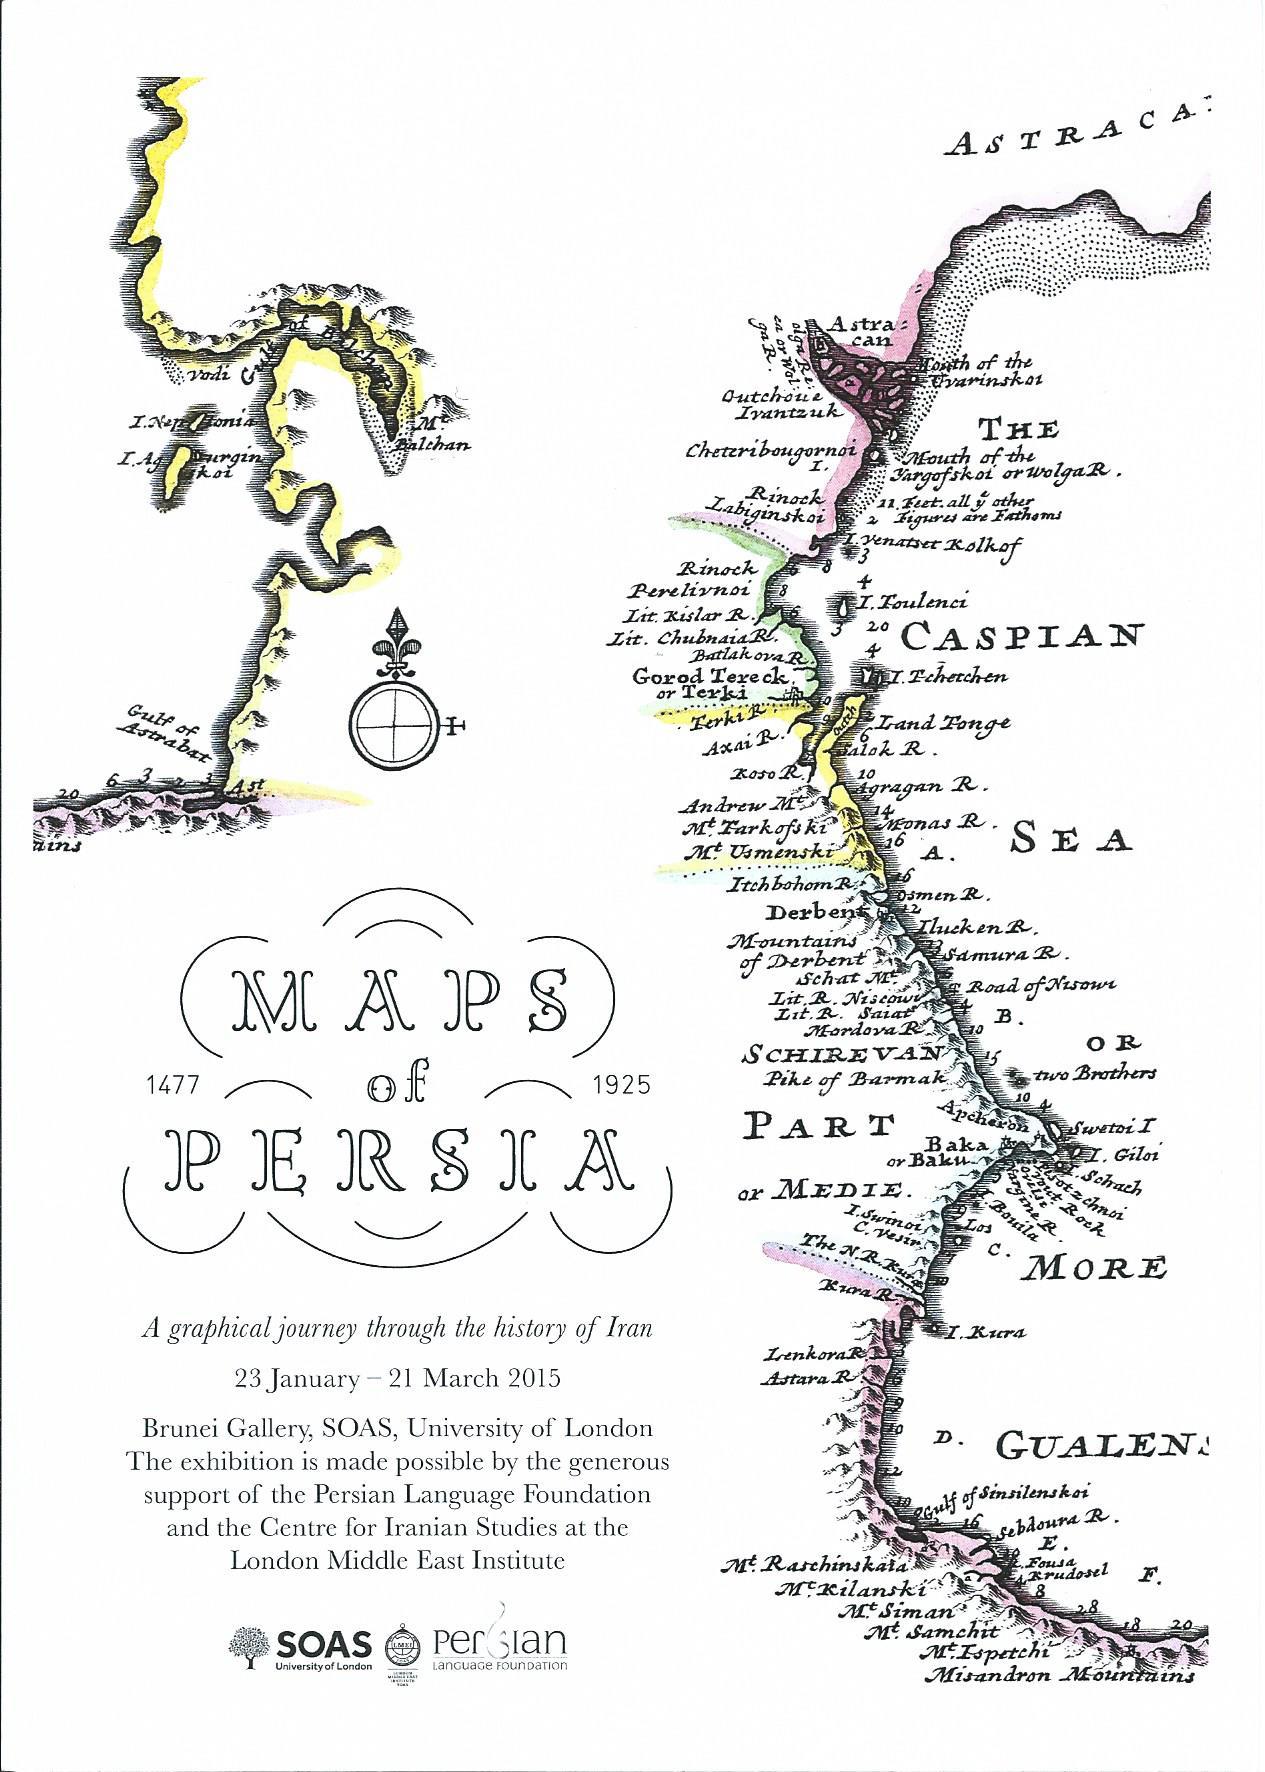 Maps of Persia: FREE exhibition  in the Brunei gallery until 21 March 2015